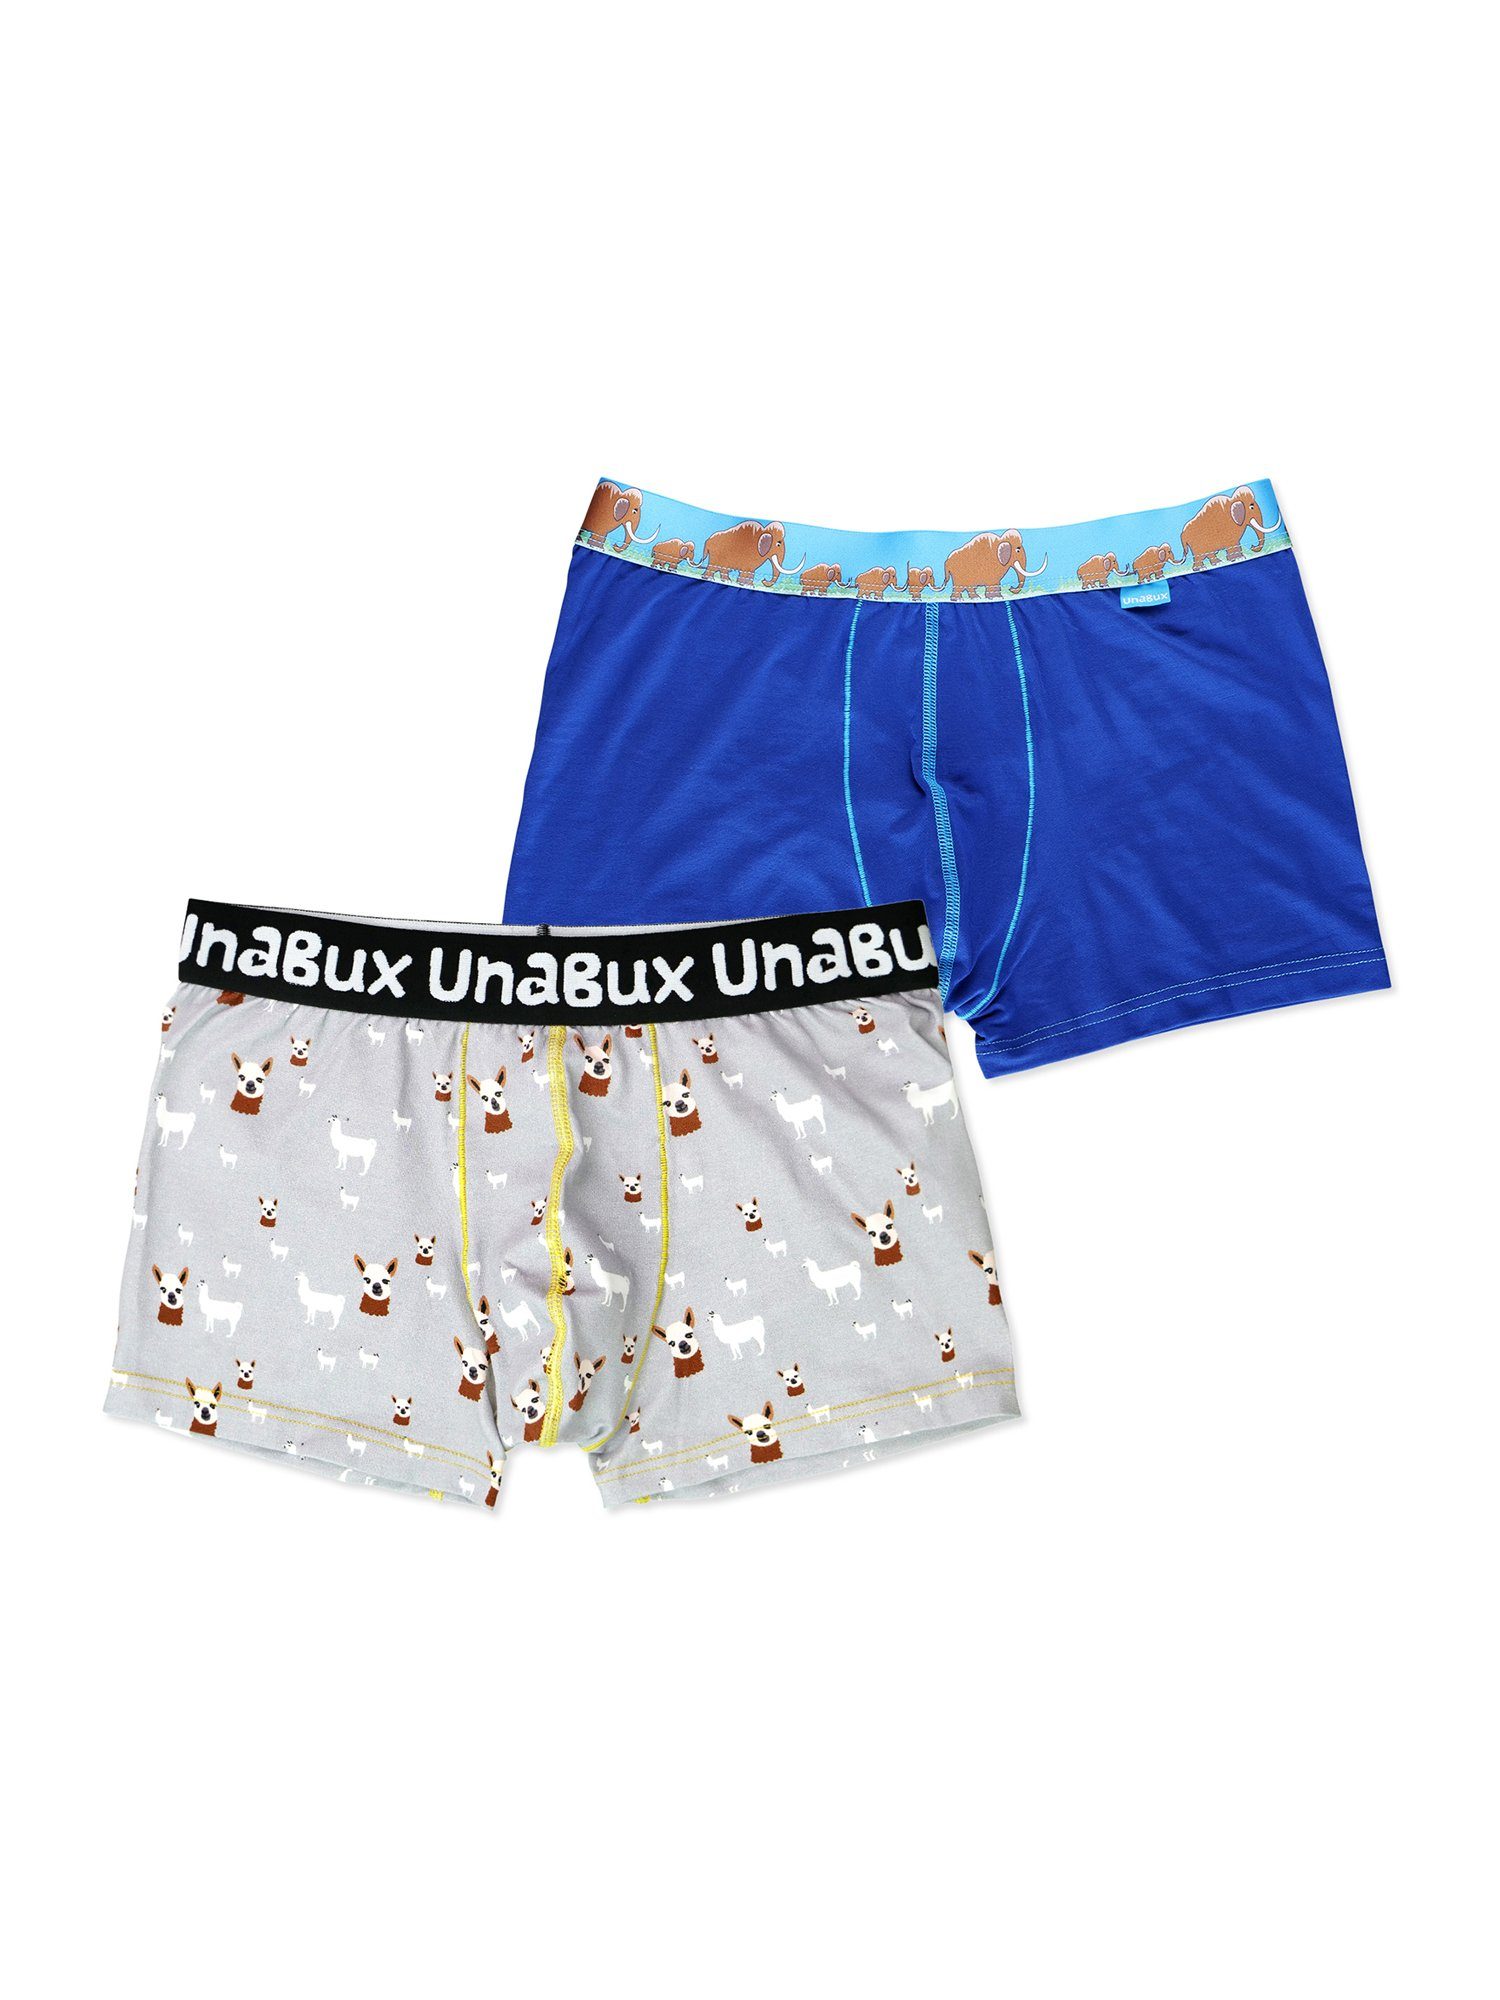 UnaBux Boxer Briefs WOOLHEAD / FIVE FINGERS Doppelpack Boxershorts (2-St) MAMOUTH HIKE